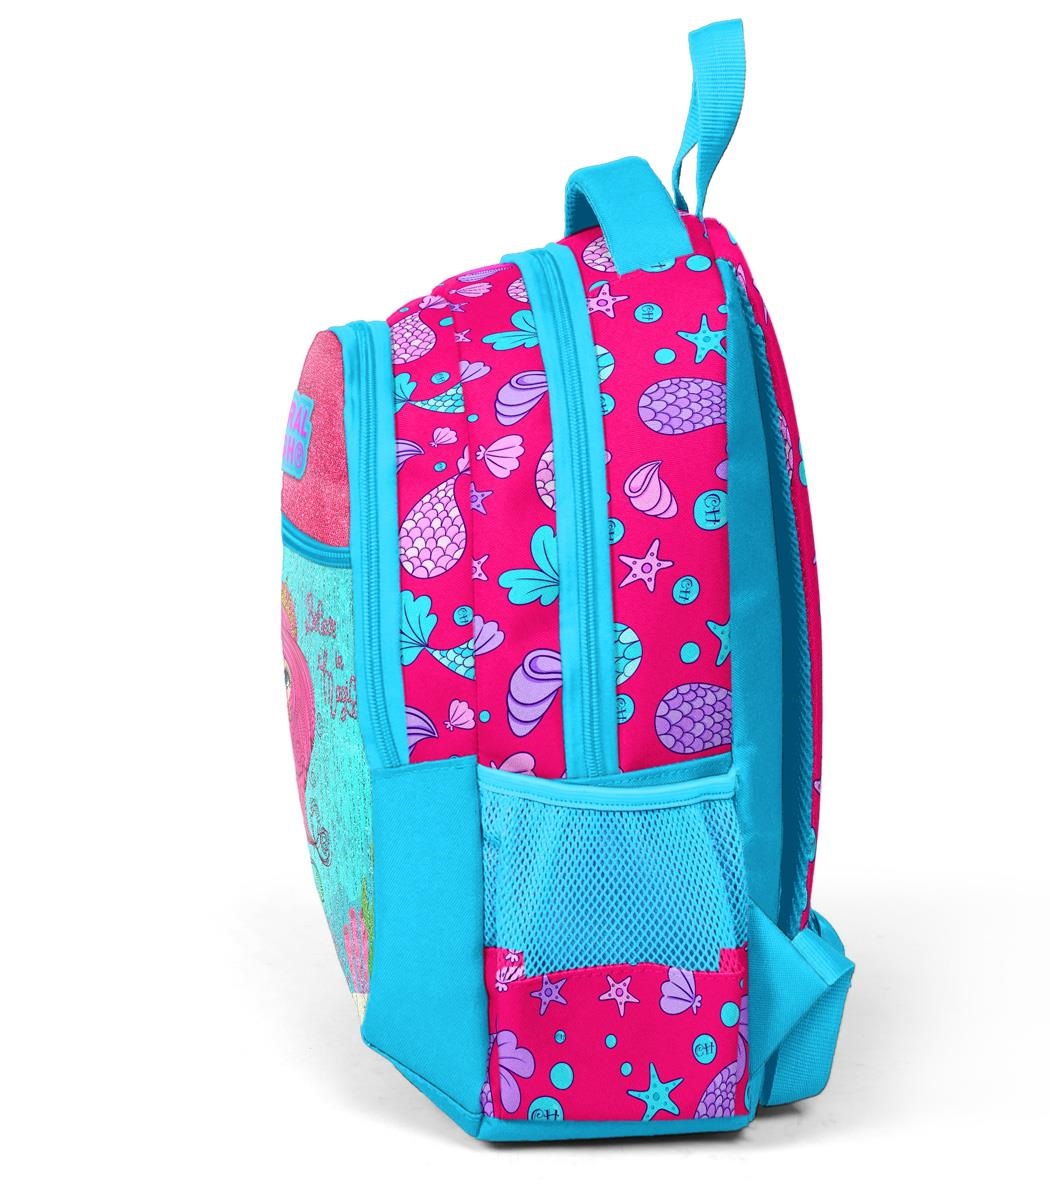 Coral High Kids Three Compartment School Backpack - Pink Mermaid Pattern